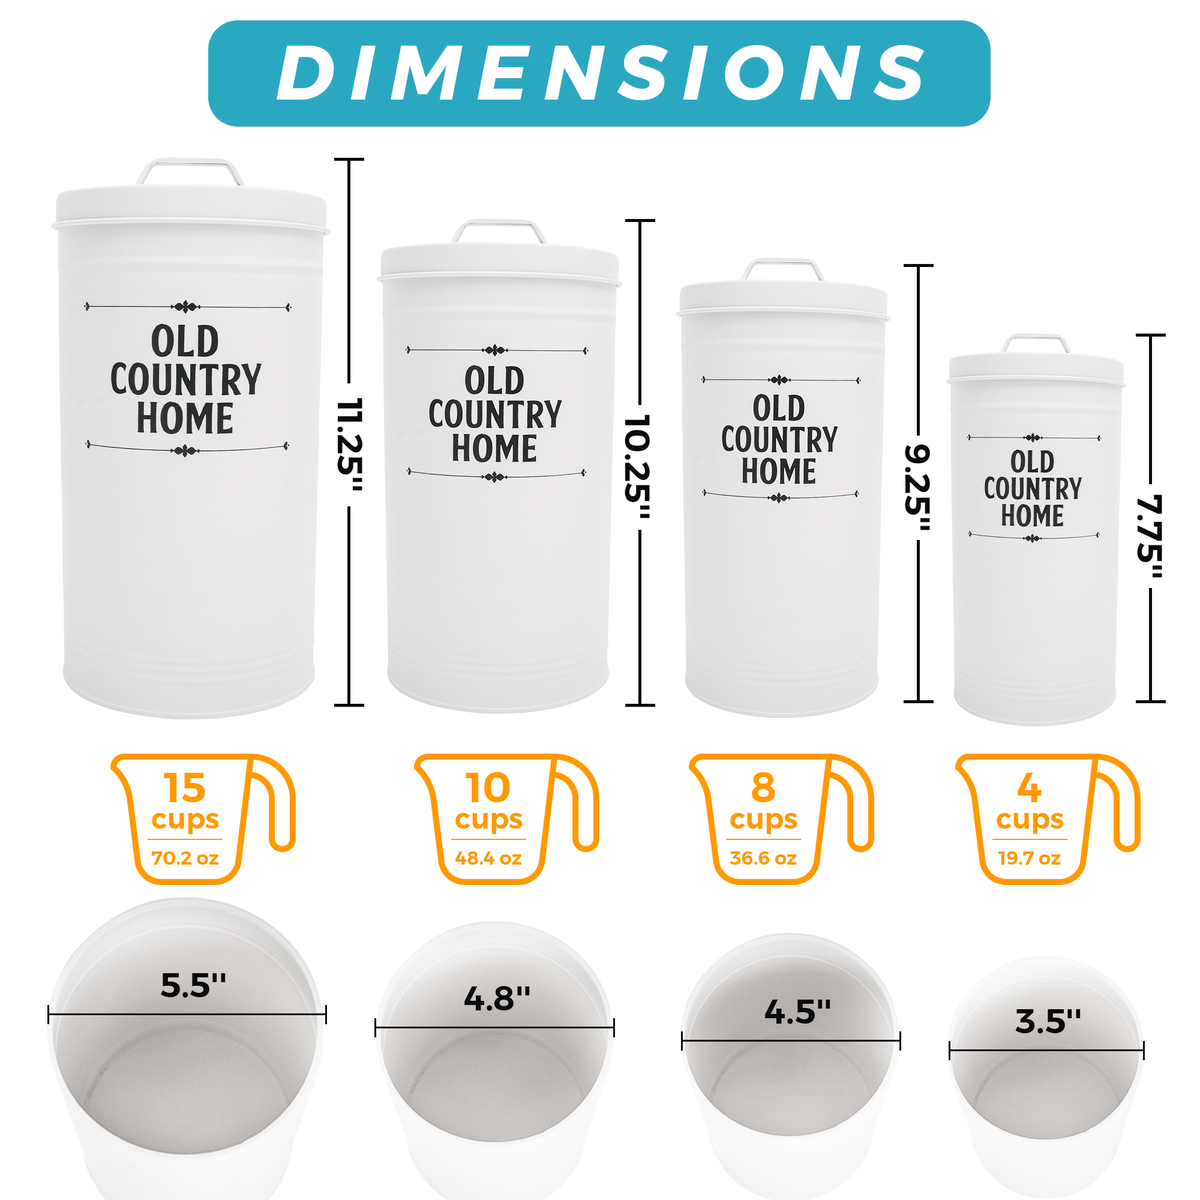 Featuring the dimensions and capacity of each white canister on the set